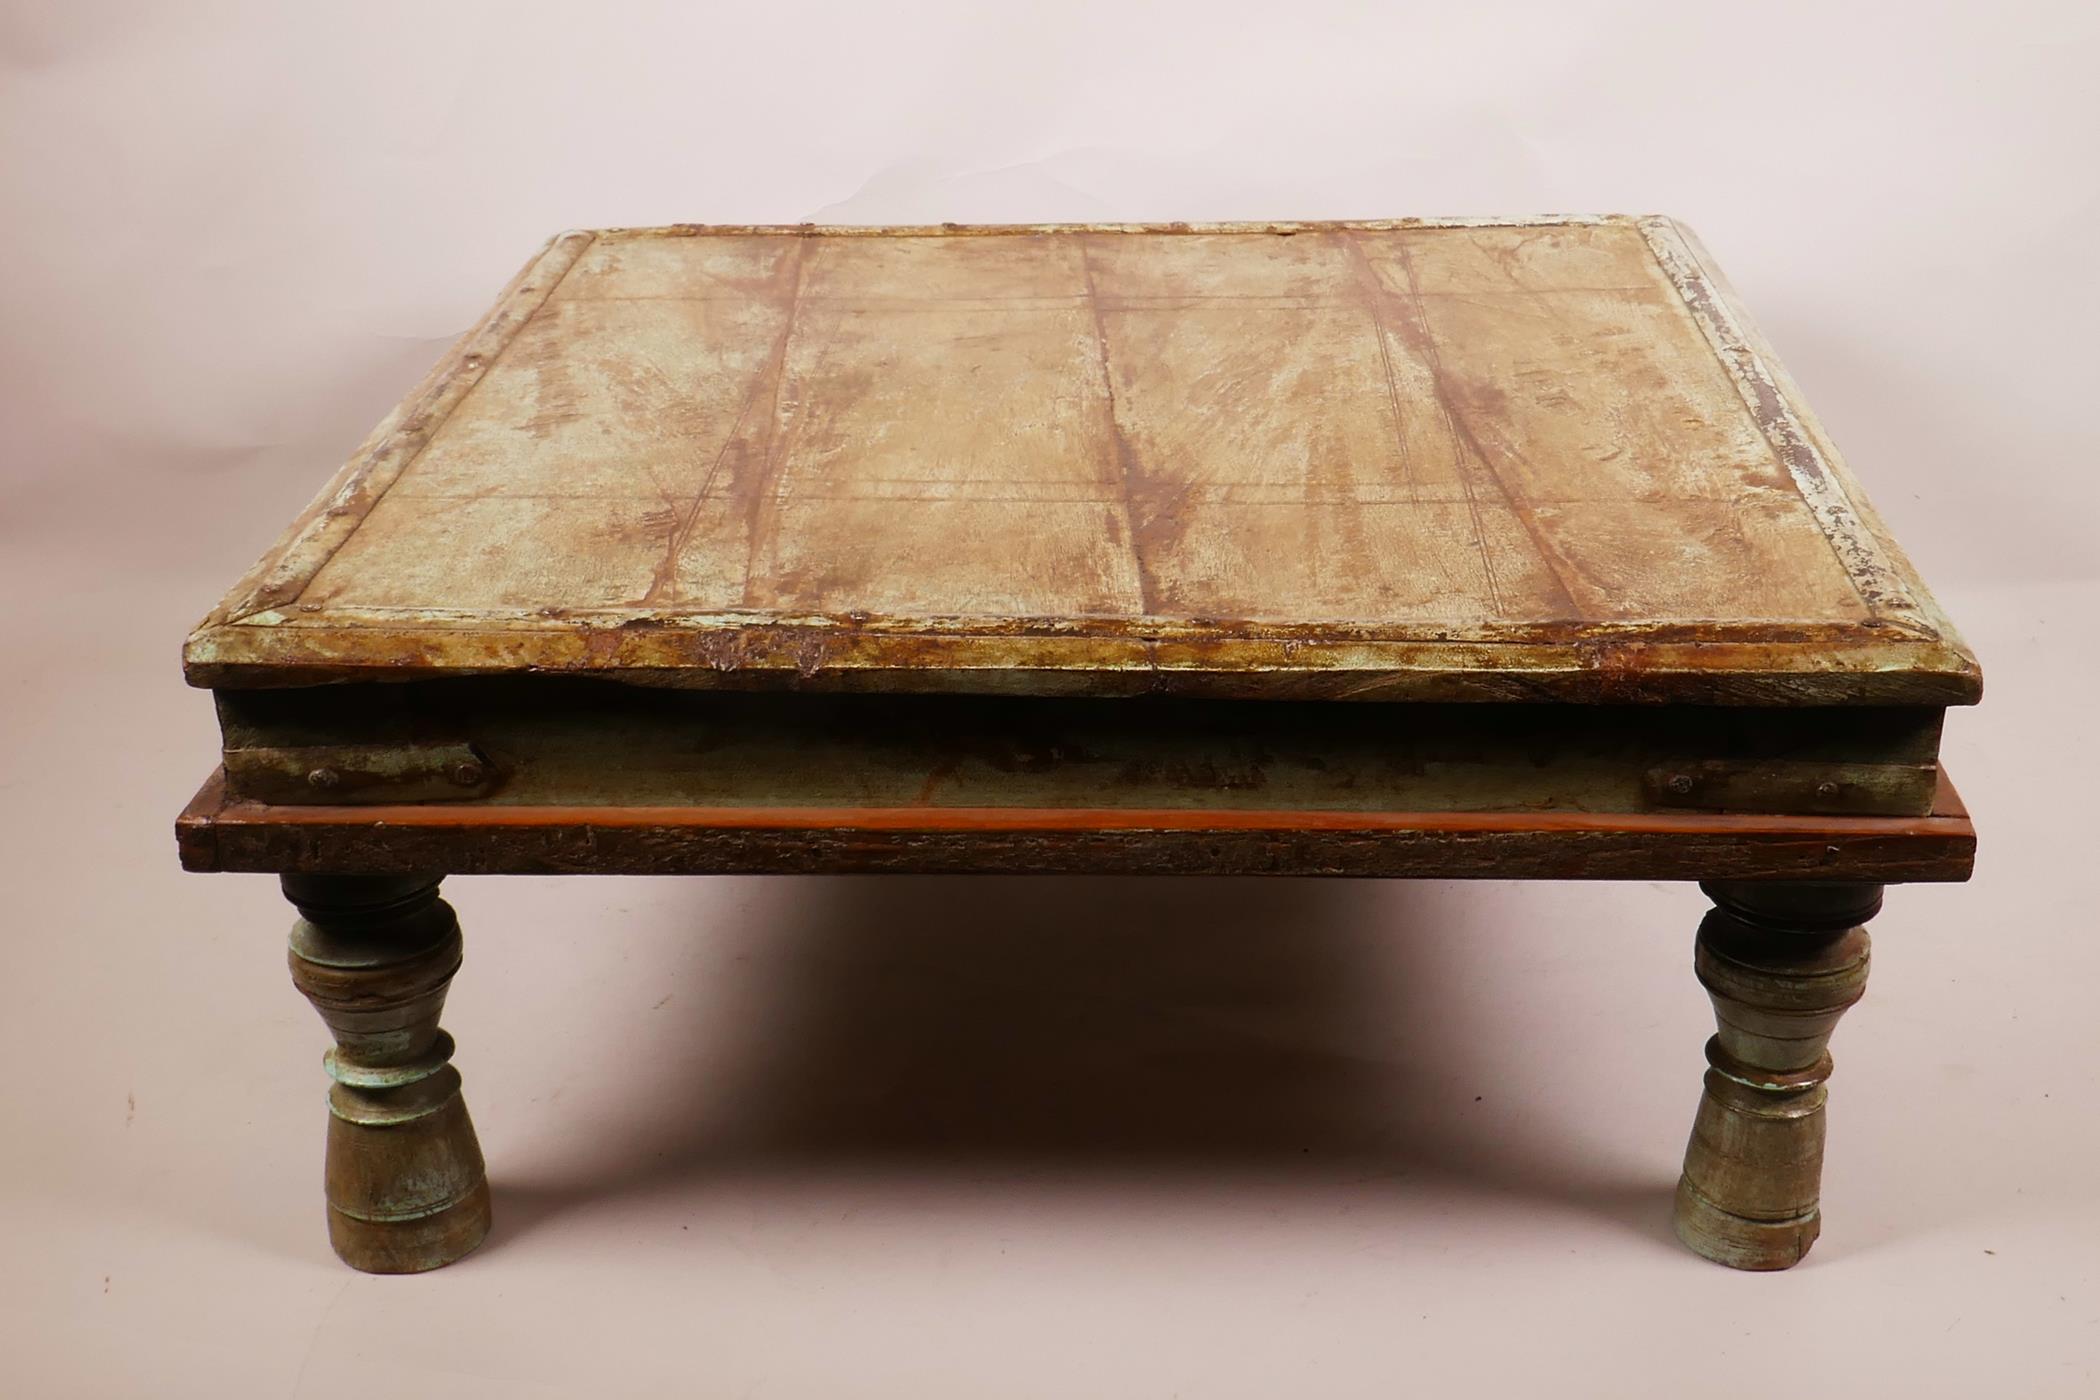 An Indian painted hardwood low coffee table, 17" x 17", 7½" high